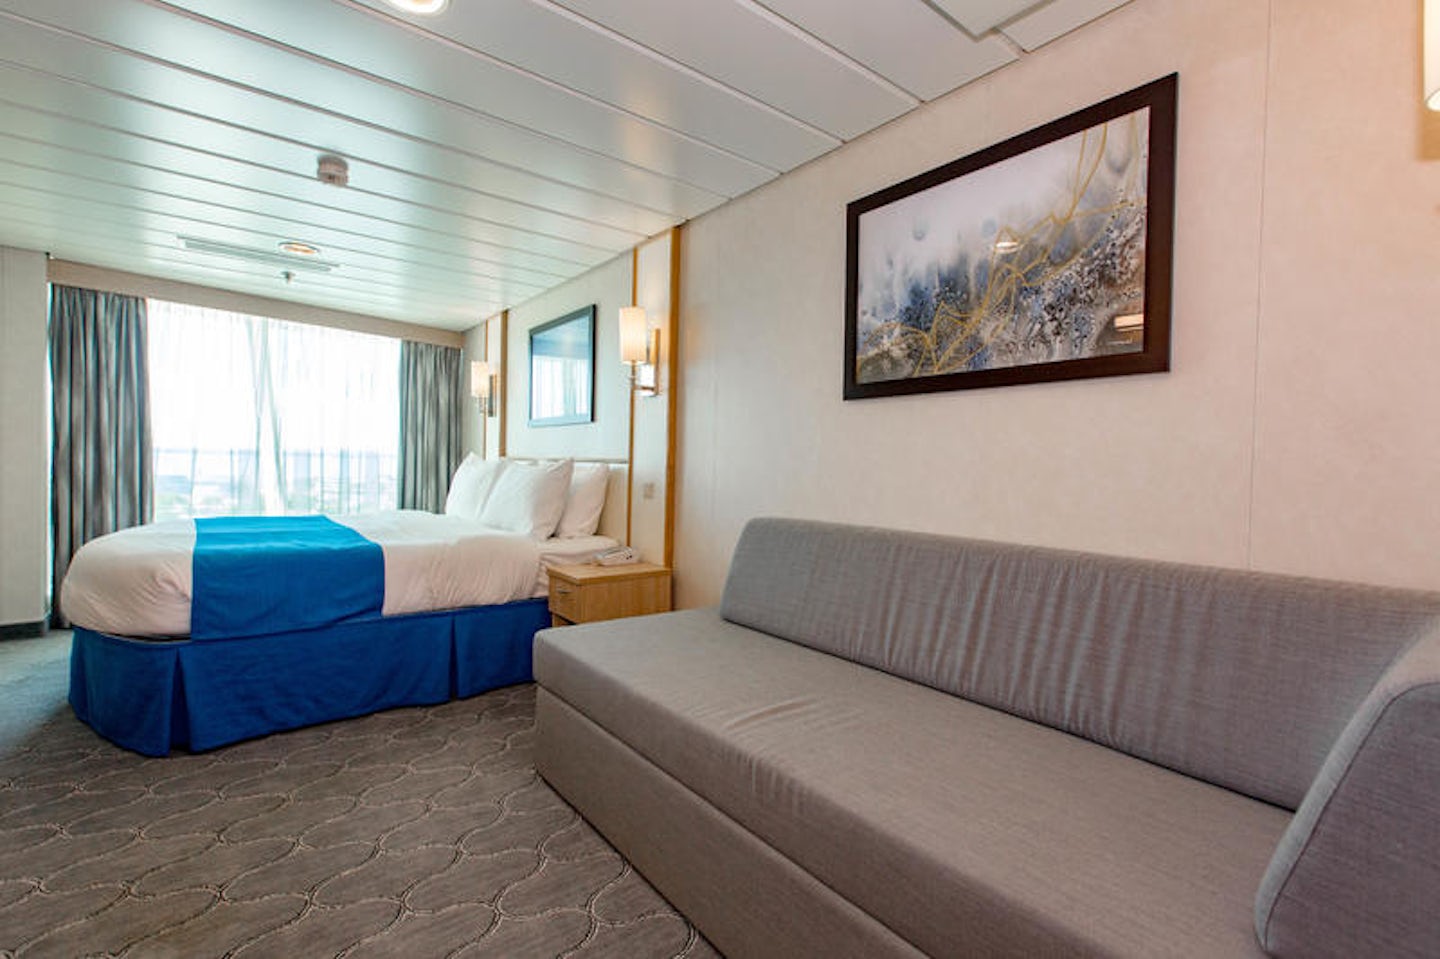 The Panoramic Ocean-View Cabin on Mariner of the Seas